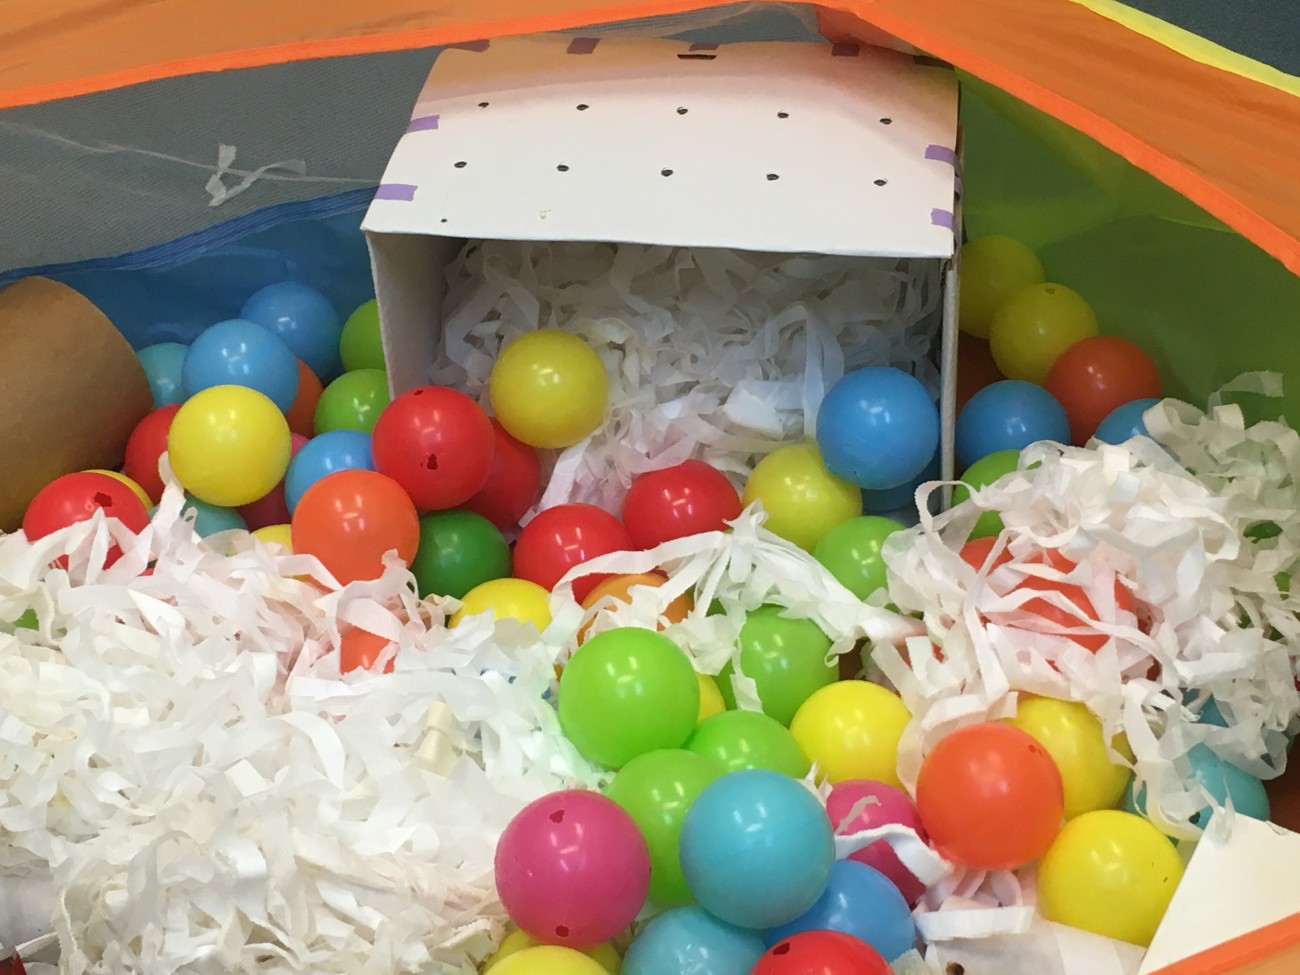 A perforated, cardboard transport carrier sits on its side in a playpen. The carrier is filled with strips of bedding material and surrounded by brightly coloured balls.